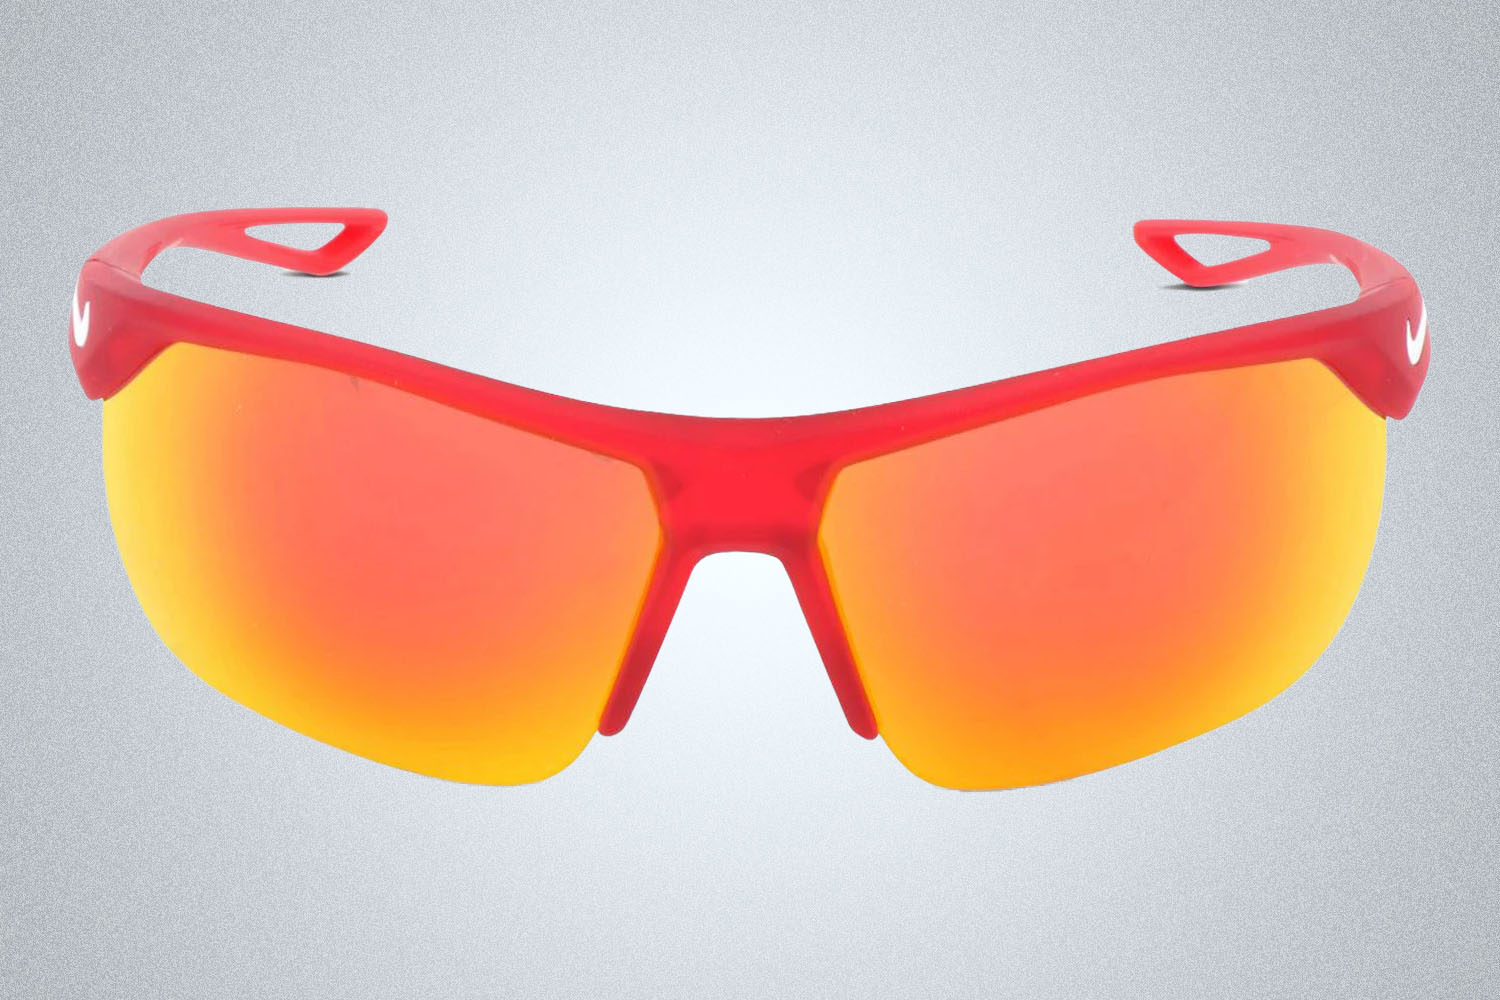 A pair of sunglasses from GlassesUSA on a grey background